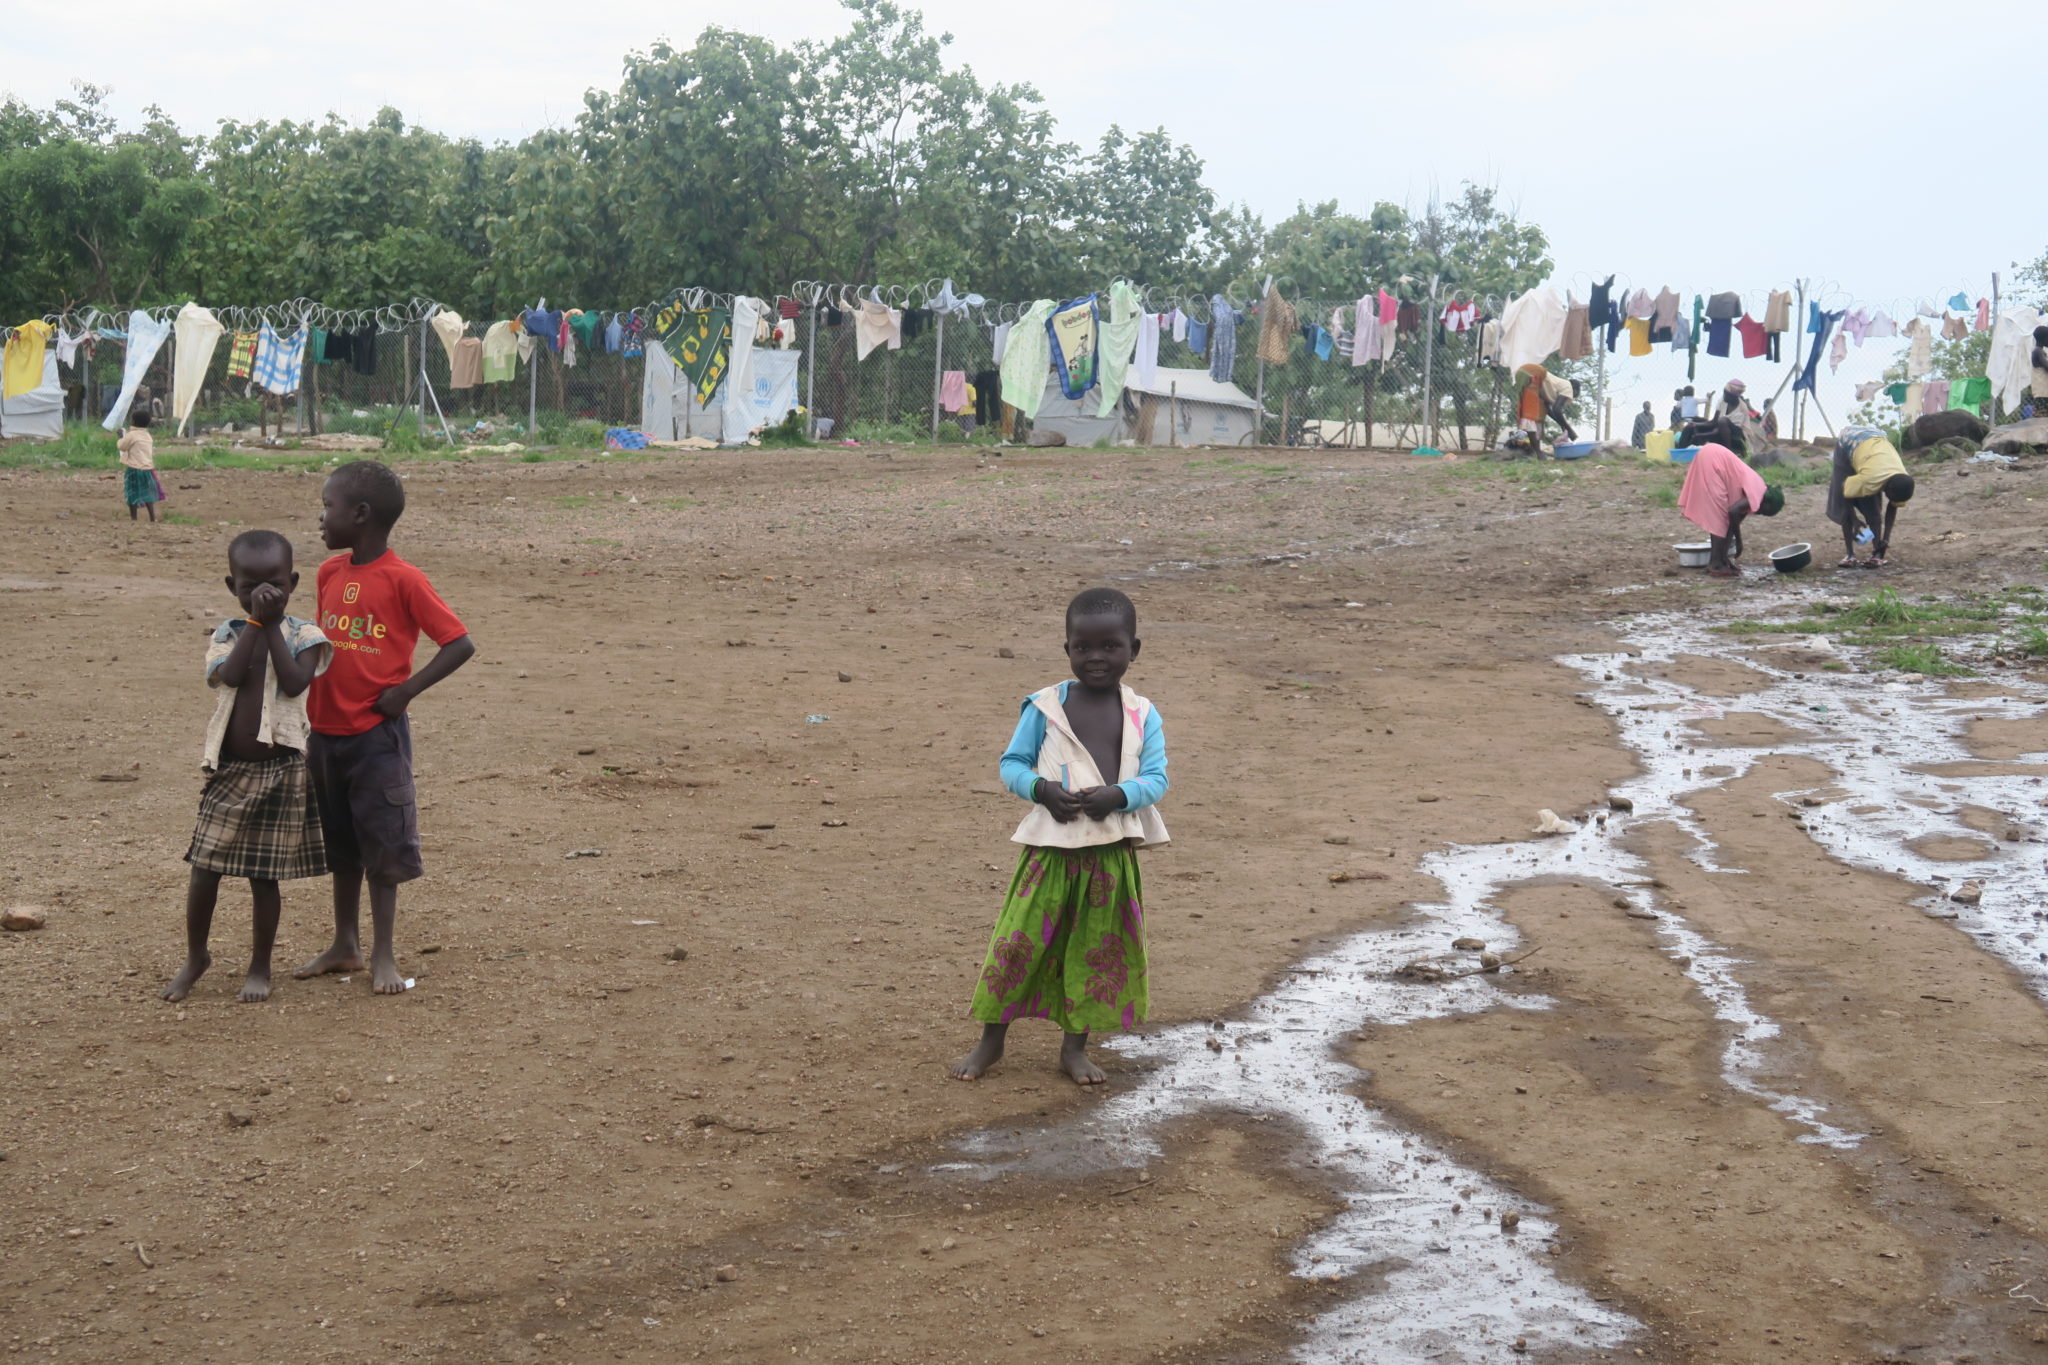 South Sudan: Global action needed to end human rights violations and humanitarian crisis